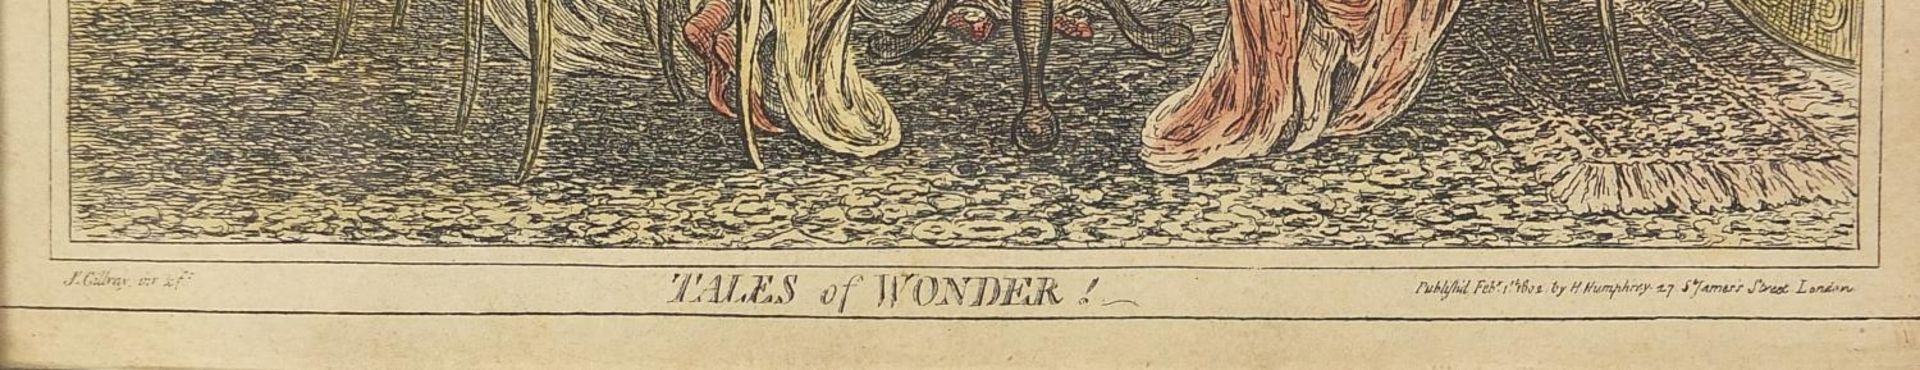 After James Gillray - Tales of Wonder, early 19th century satirical print in colour, published - Image 4 of 5